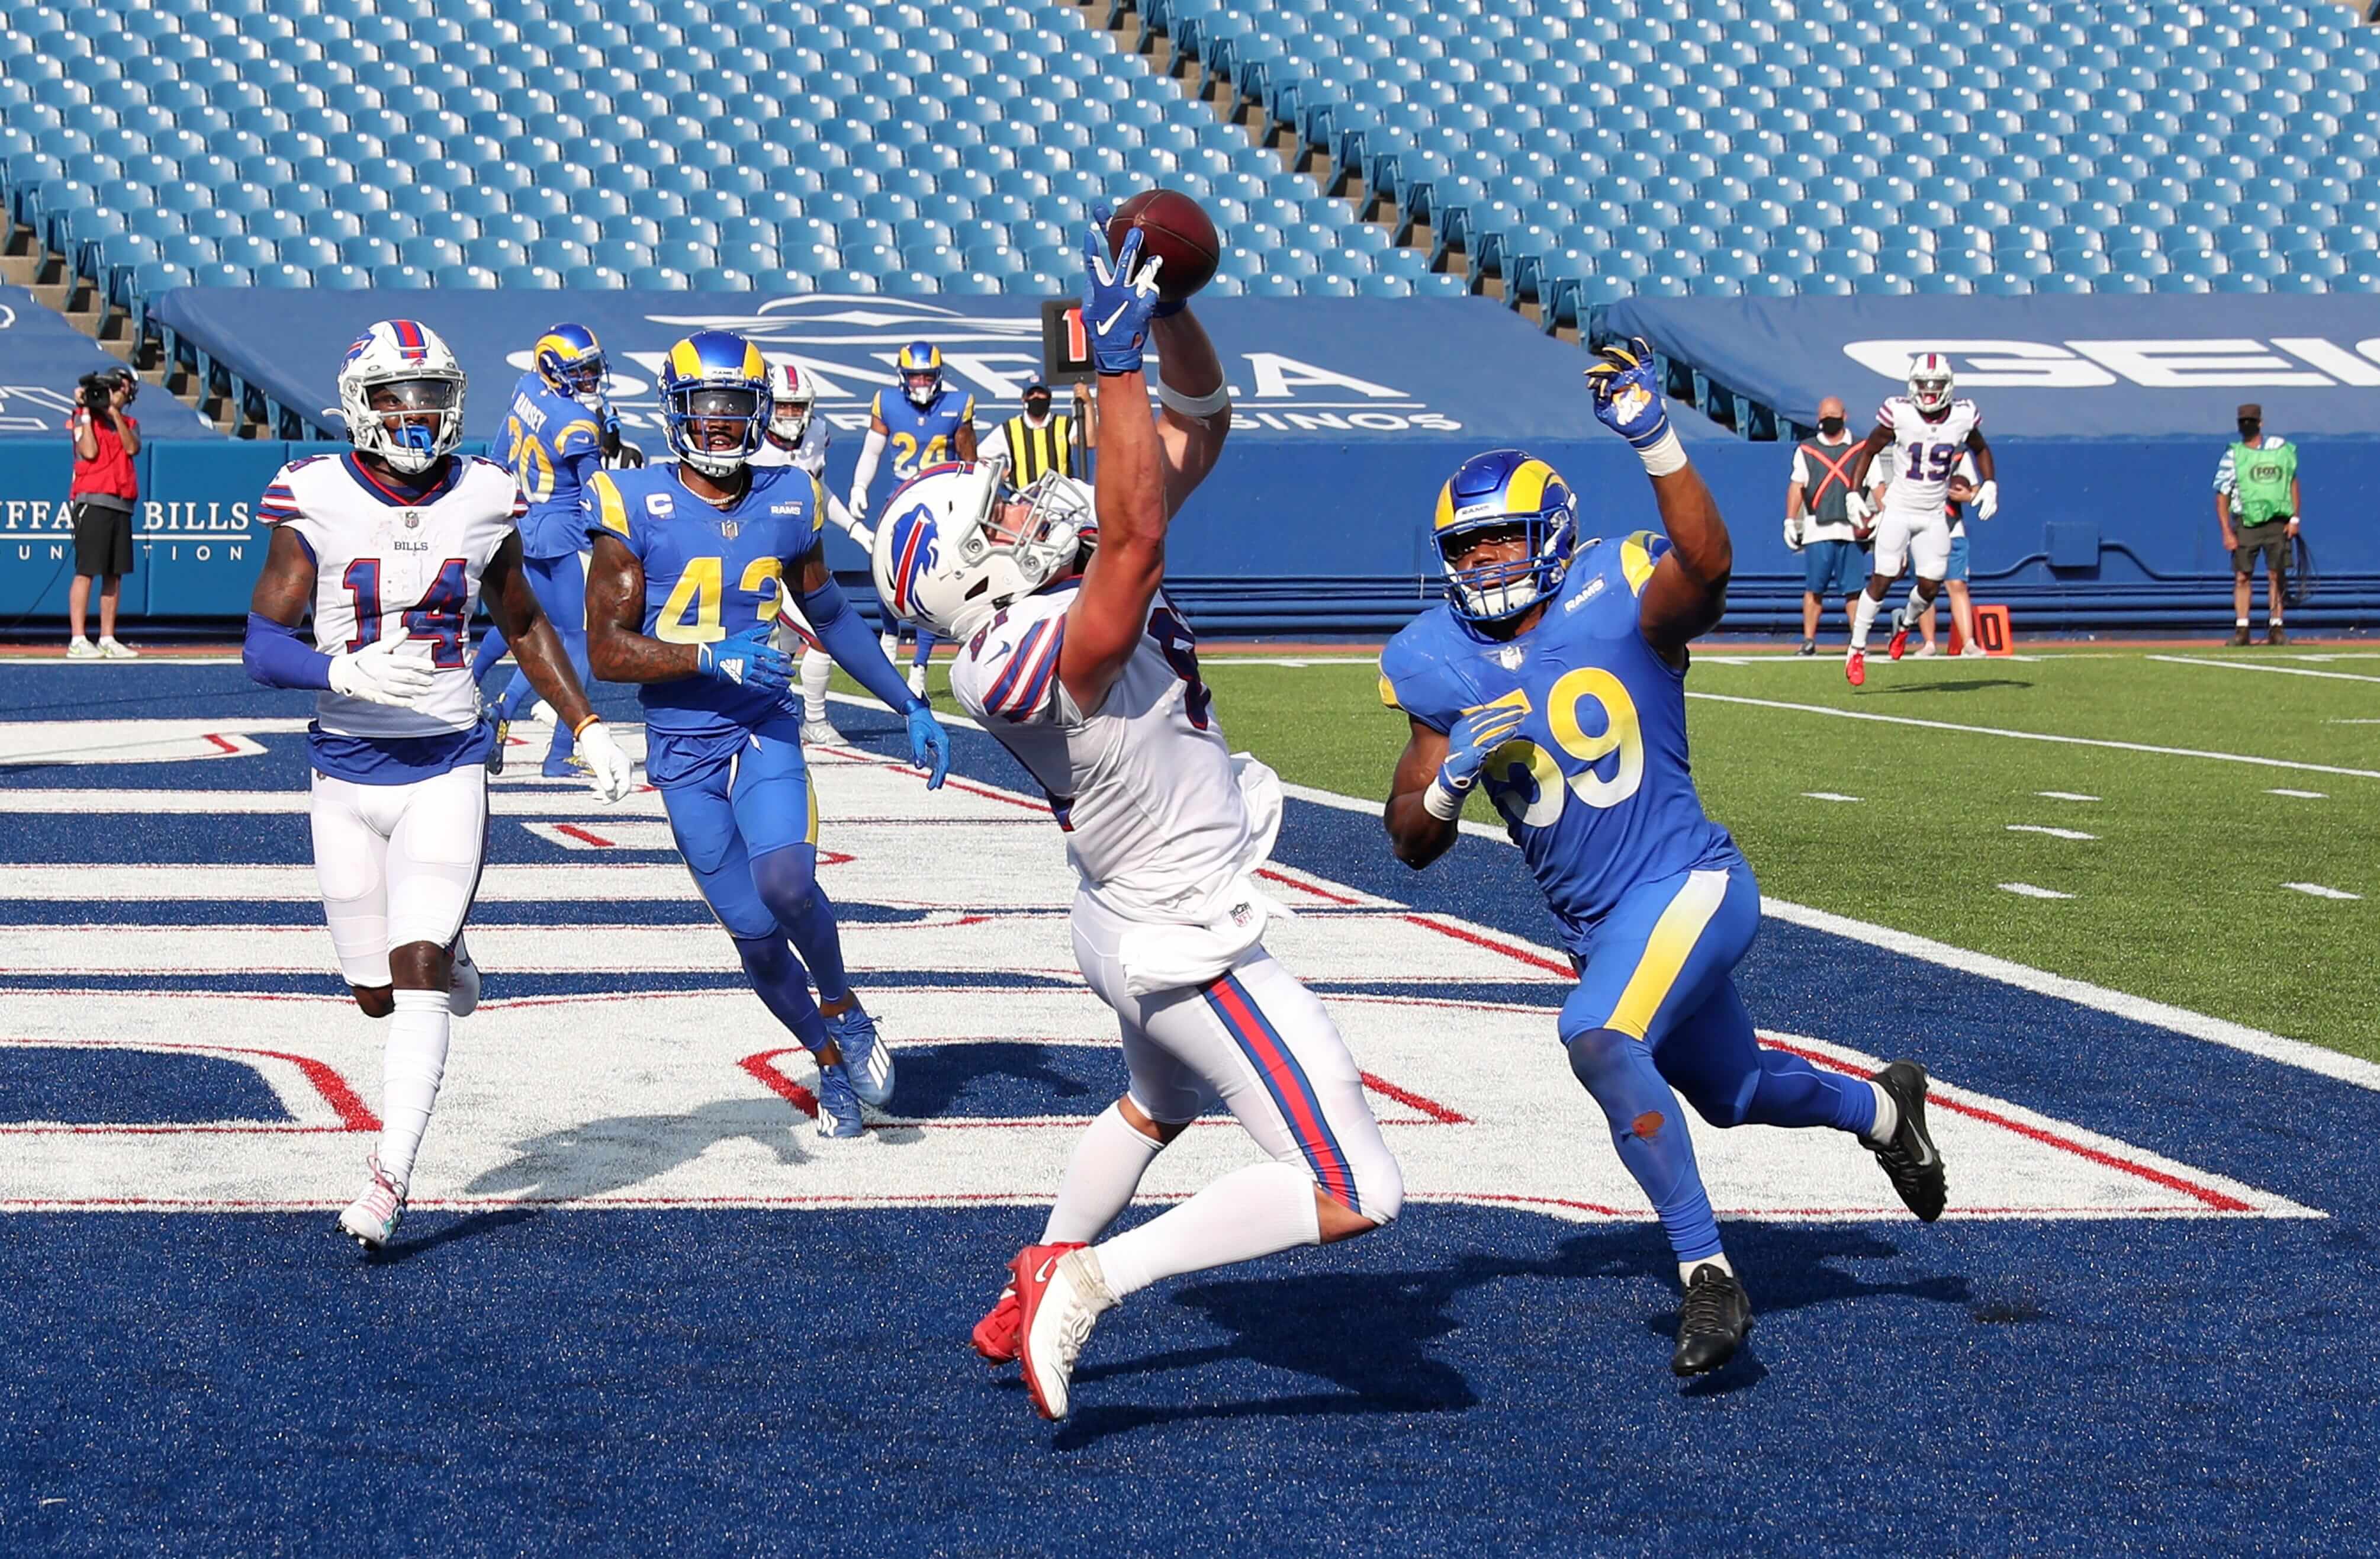 THE PHOTO: Bills tight end Tyler Kroft catches this three-yard touchdown pass over Rams Micah Kiser for the game-winning score with 15 seconds left in the game. The Bills beat the Rams 35-32.